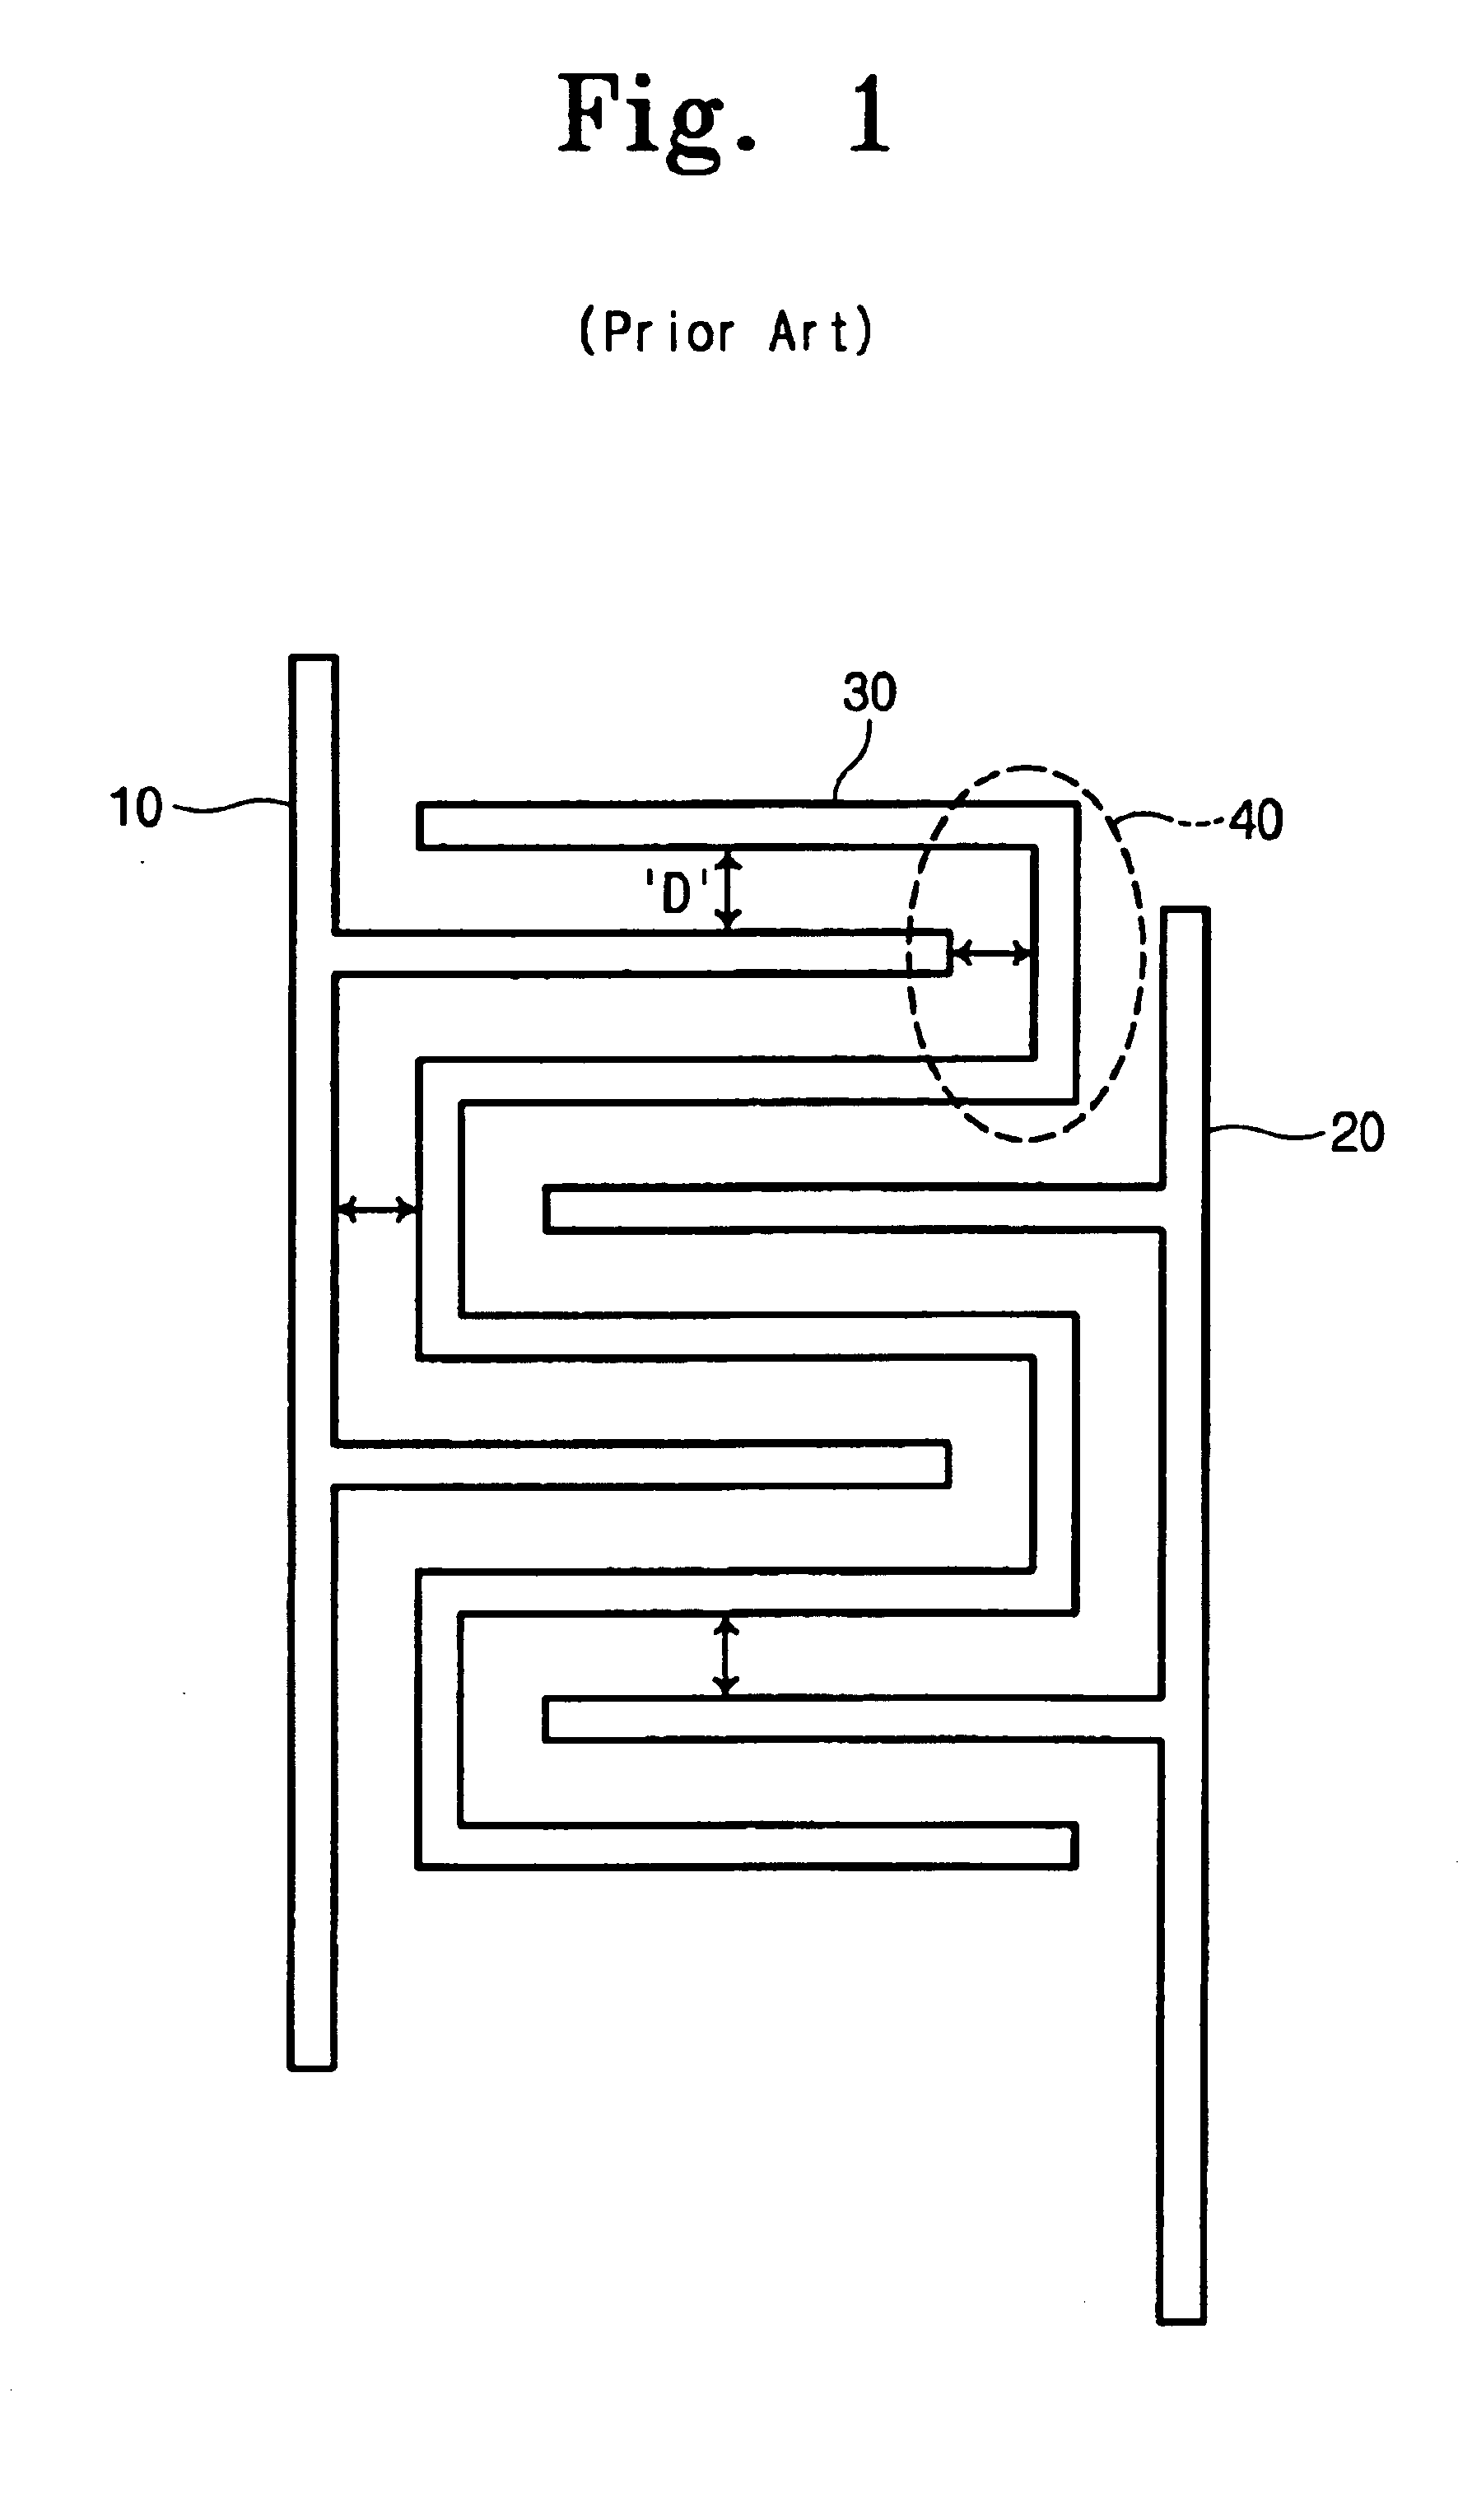 Apparatus for testing reliability of interconnection in integrated circuit